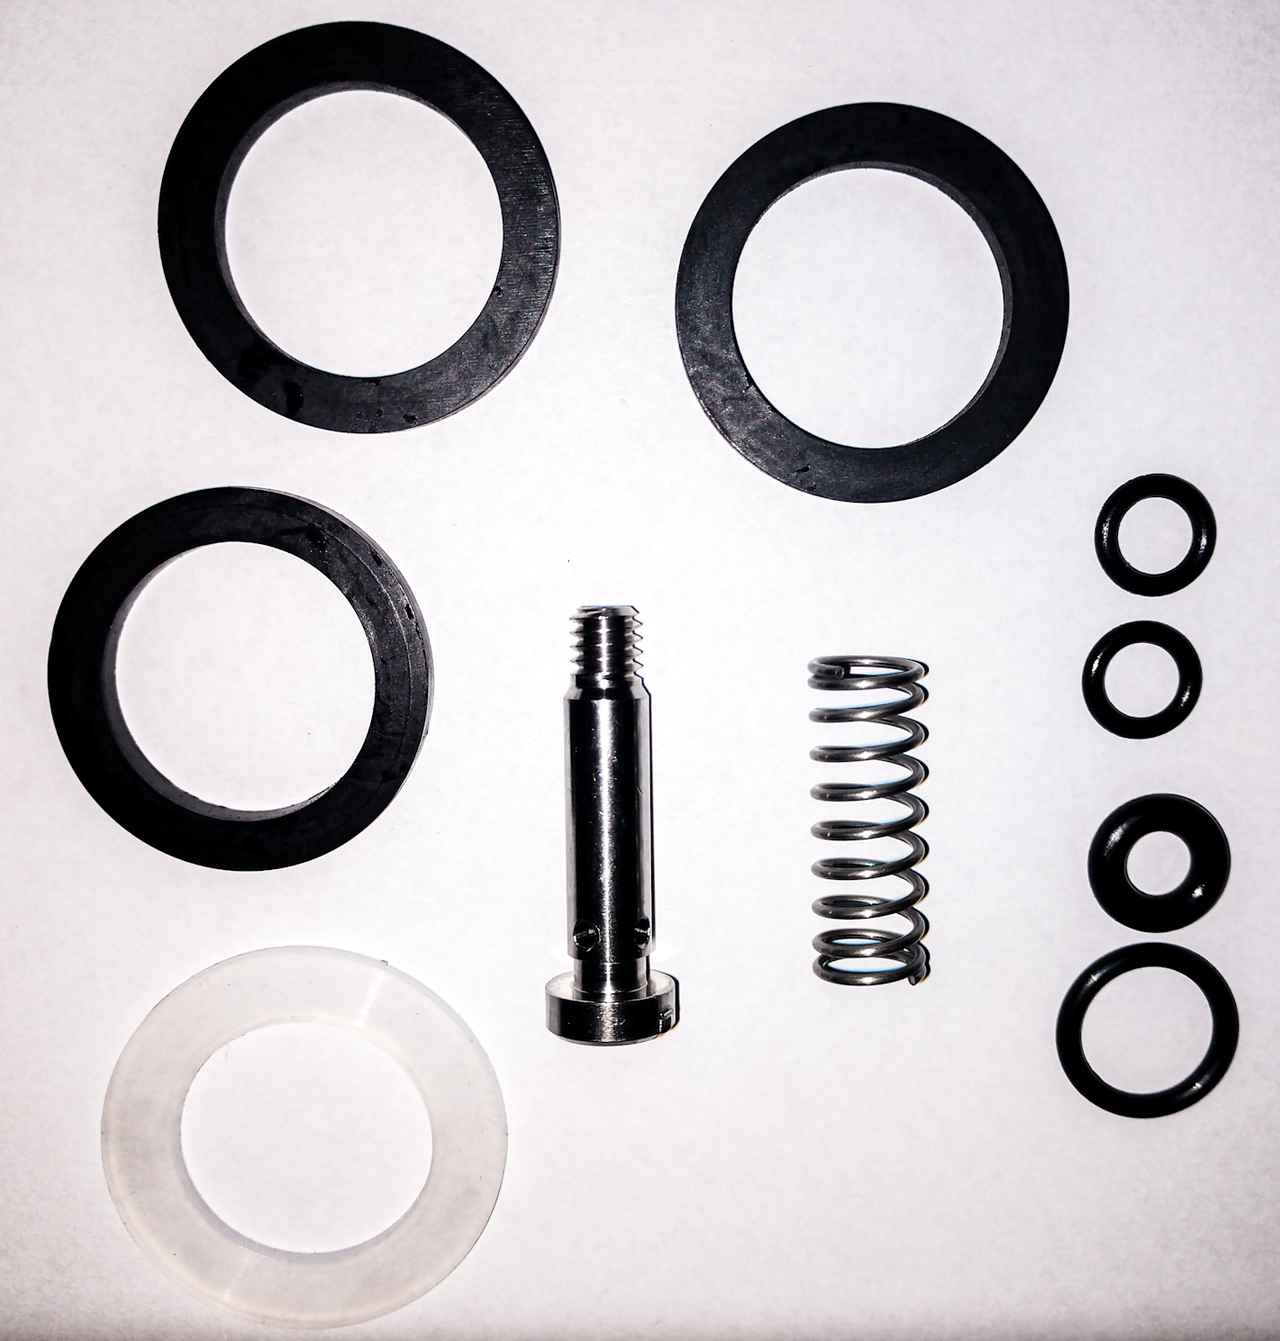 Rebuild Kit for Glass Rinser for Draft Beer Drip Trays